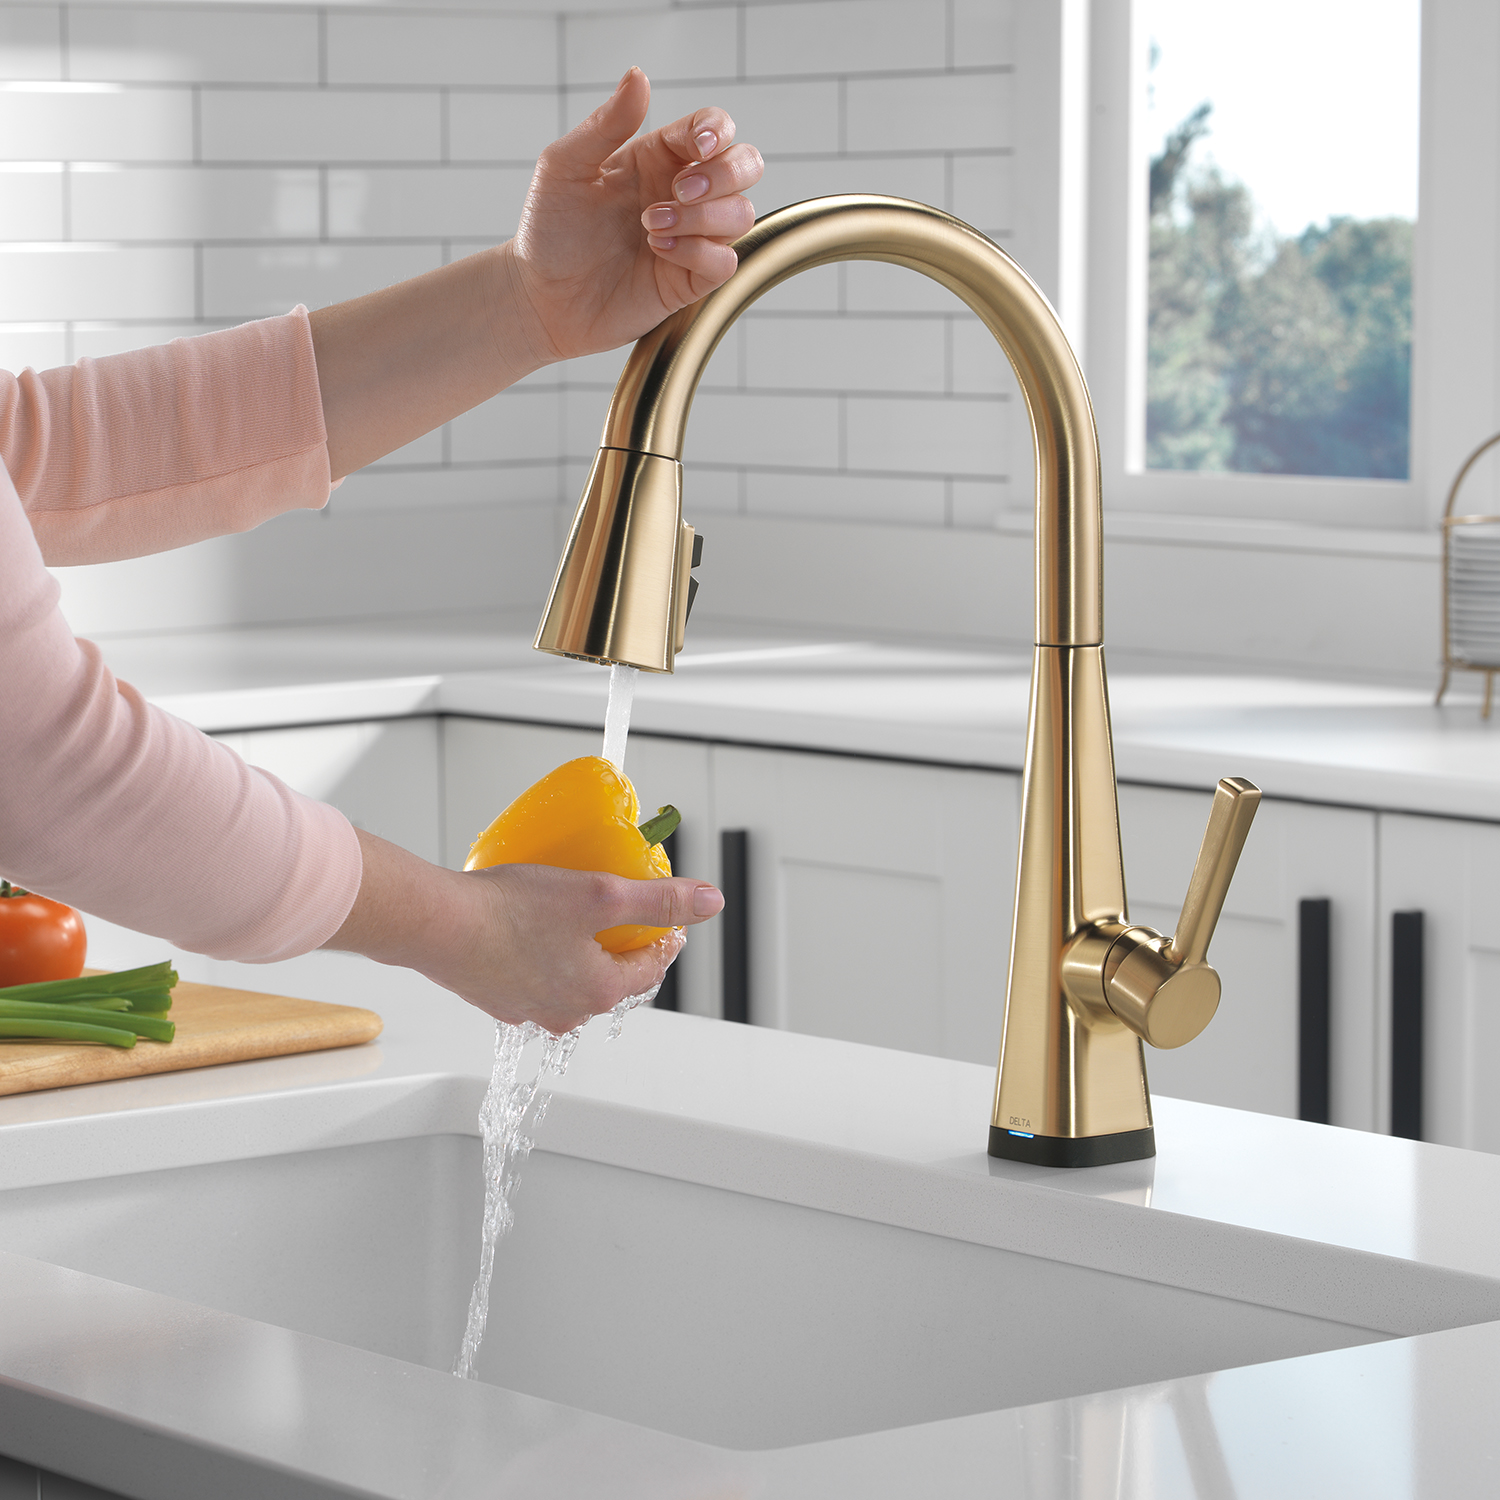 Delta Touch₂O Technology helps keep your kitchen faucet clean, even when your hands aren't. A simple touch anywhere on the spout or kitchen faucet handle with your wrist or forearm activates the flow of water at the temperature where your faucet handle is set. These kitchen sink faucets is equipped with a LED light which changes color to alert you to the water's temperature and elimiates any possible surprises or discomfort..